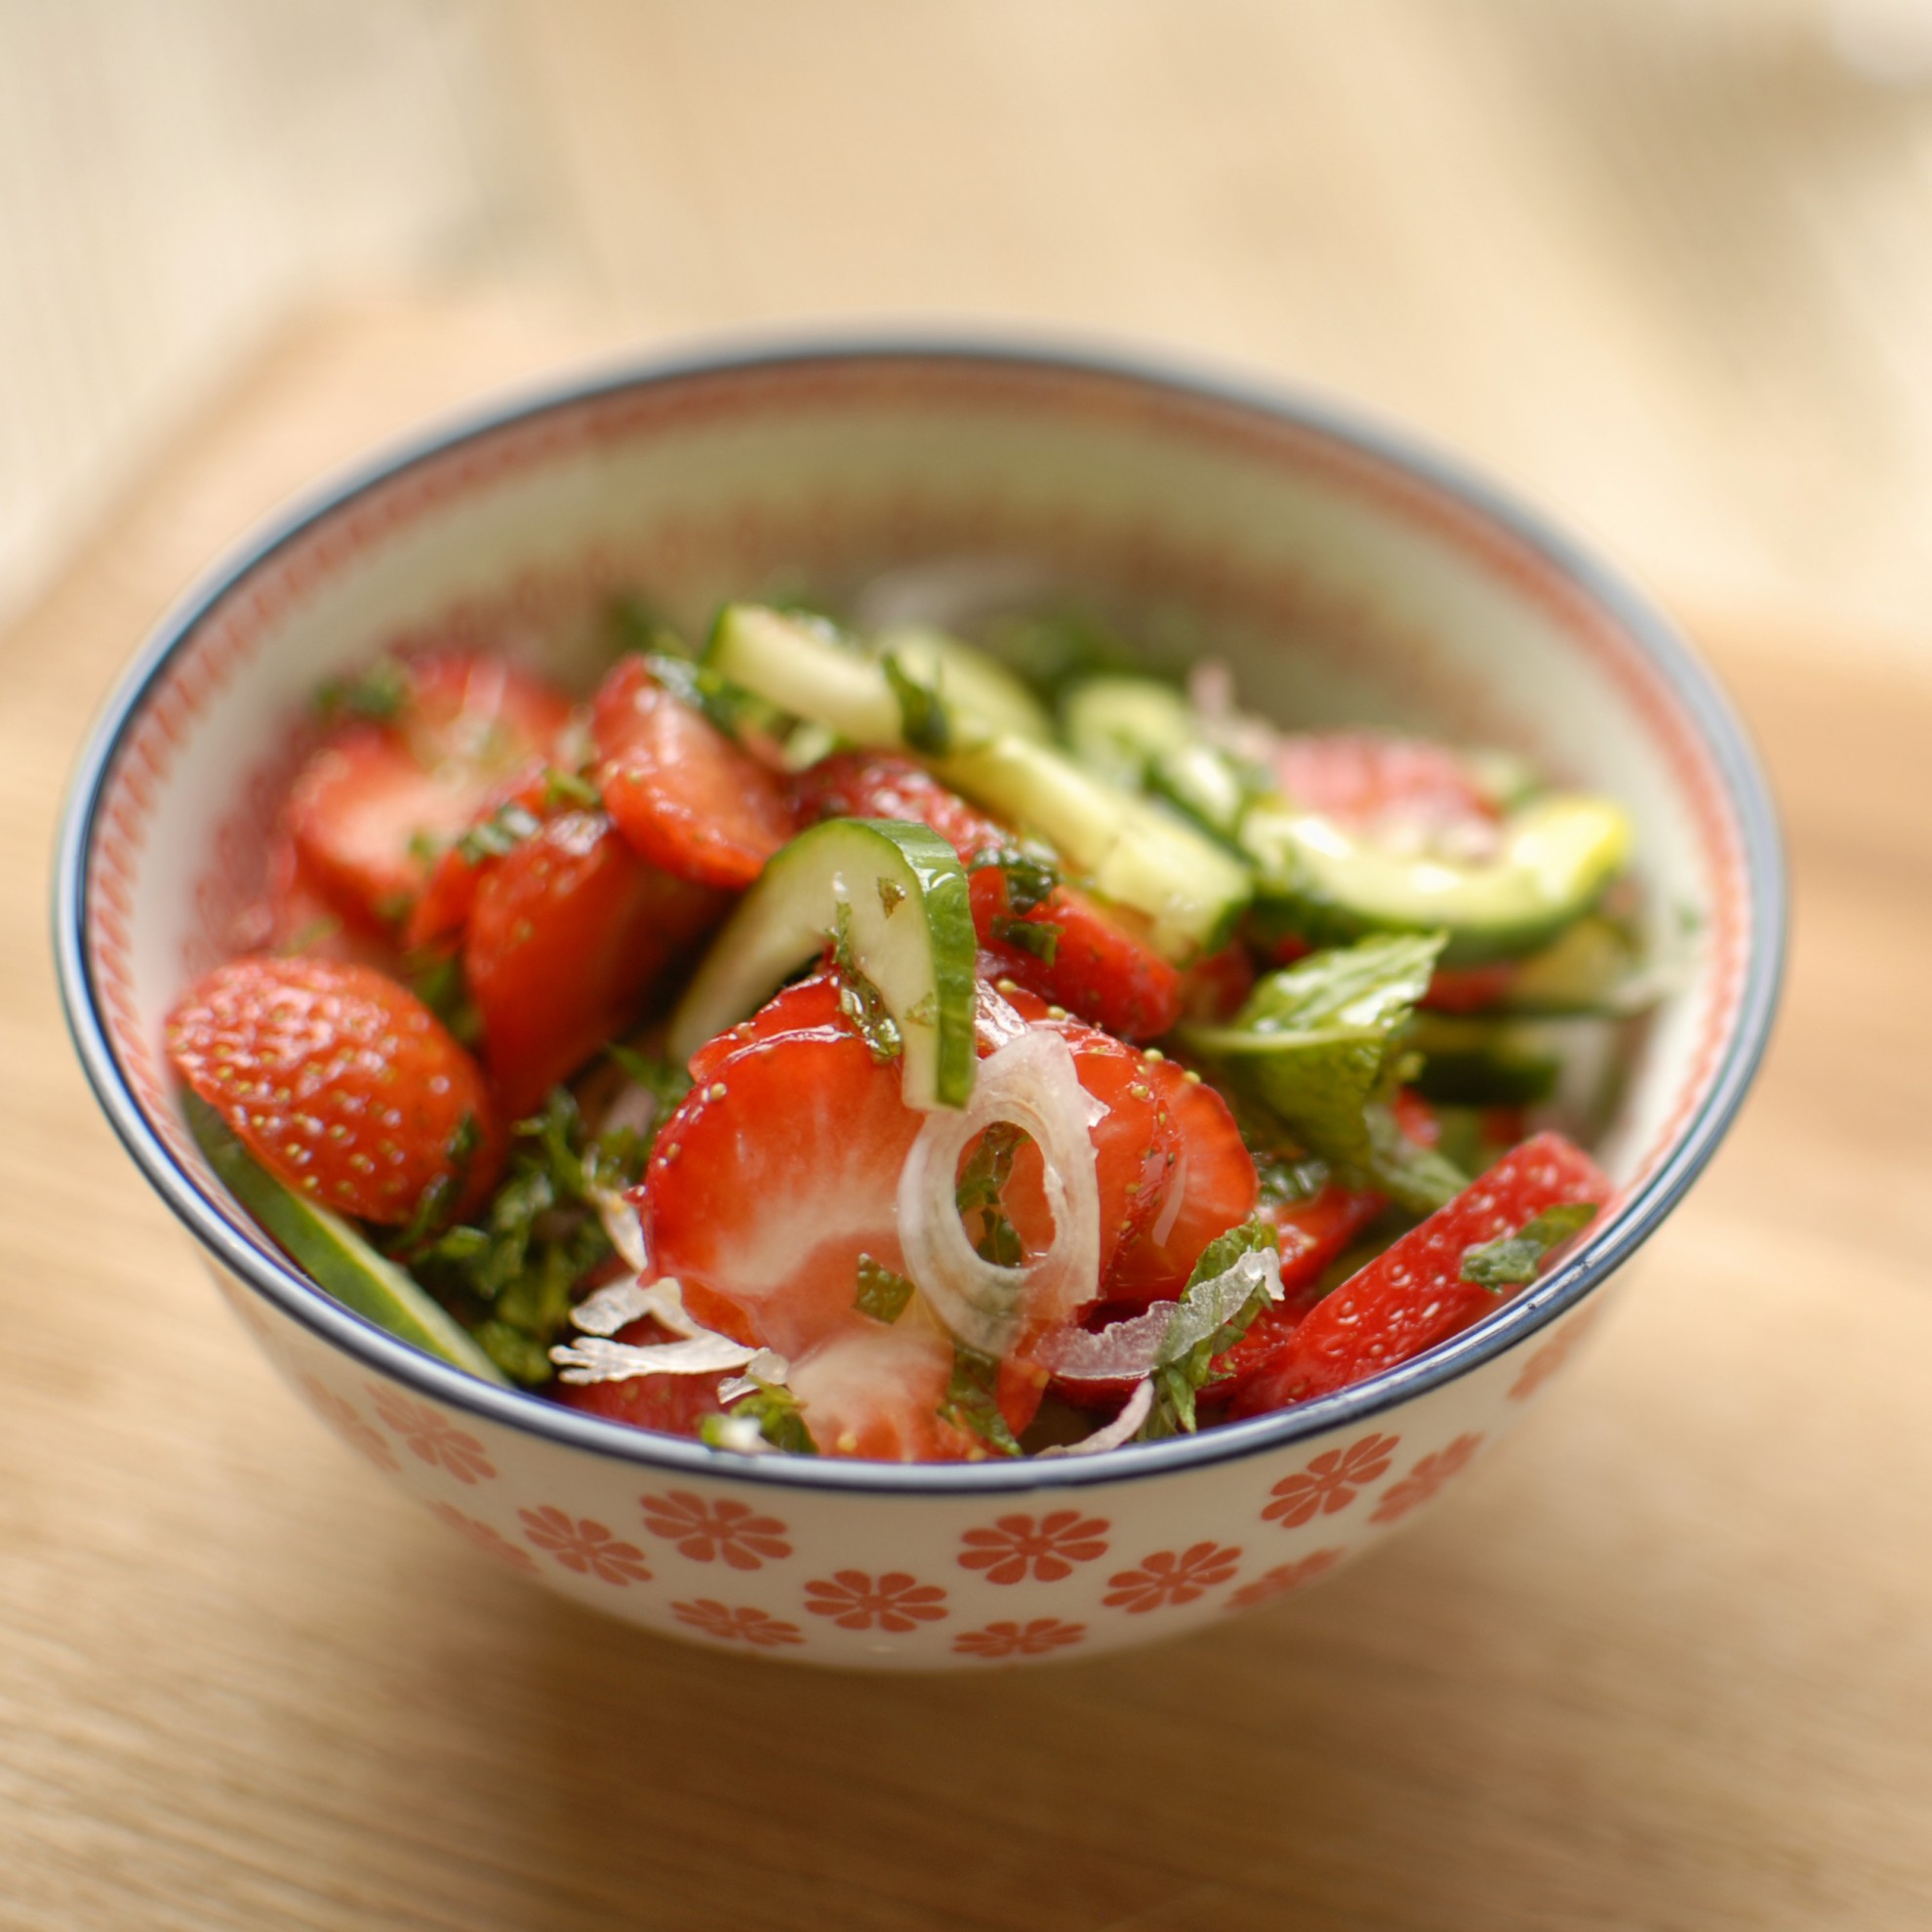 cucumber shallot and strawberry salad with mint and passionfruit dressing